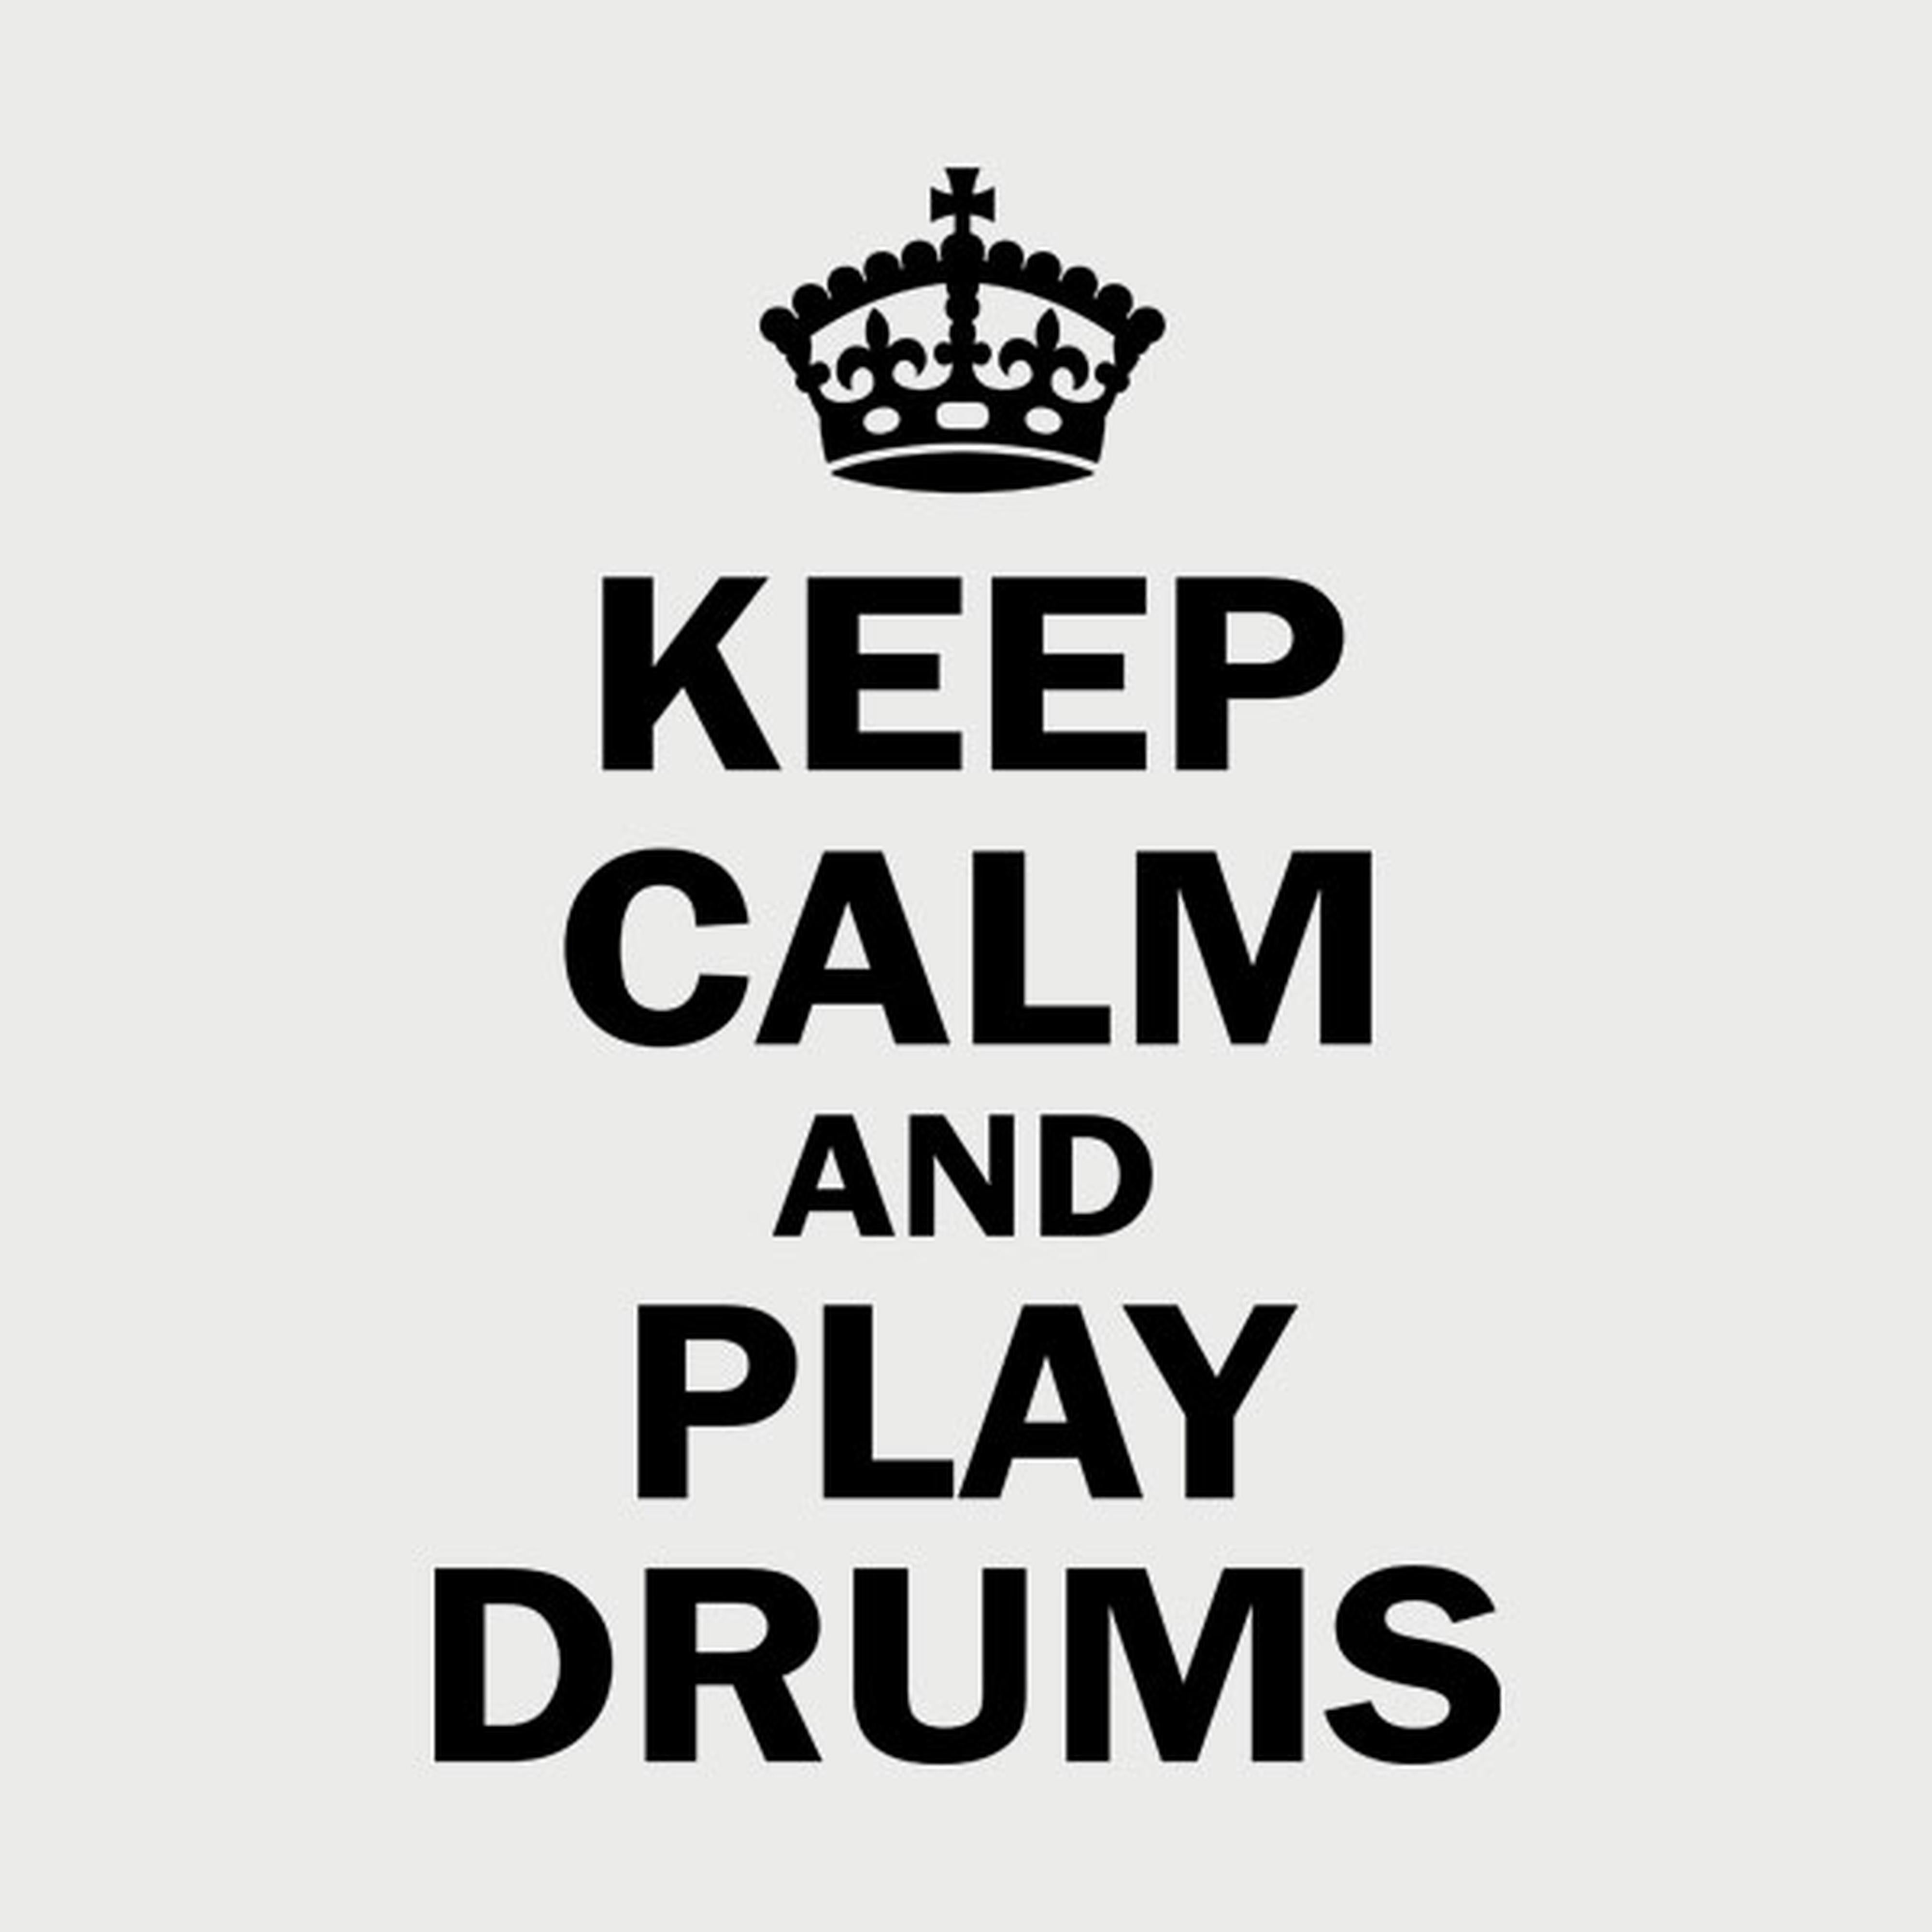 Keep calm and play drums - T-shirt